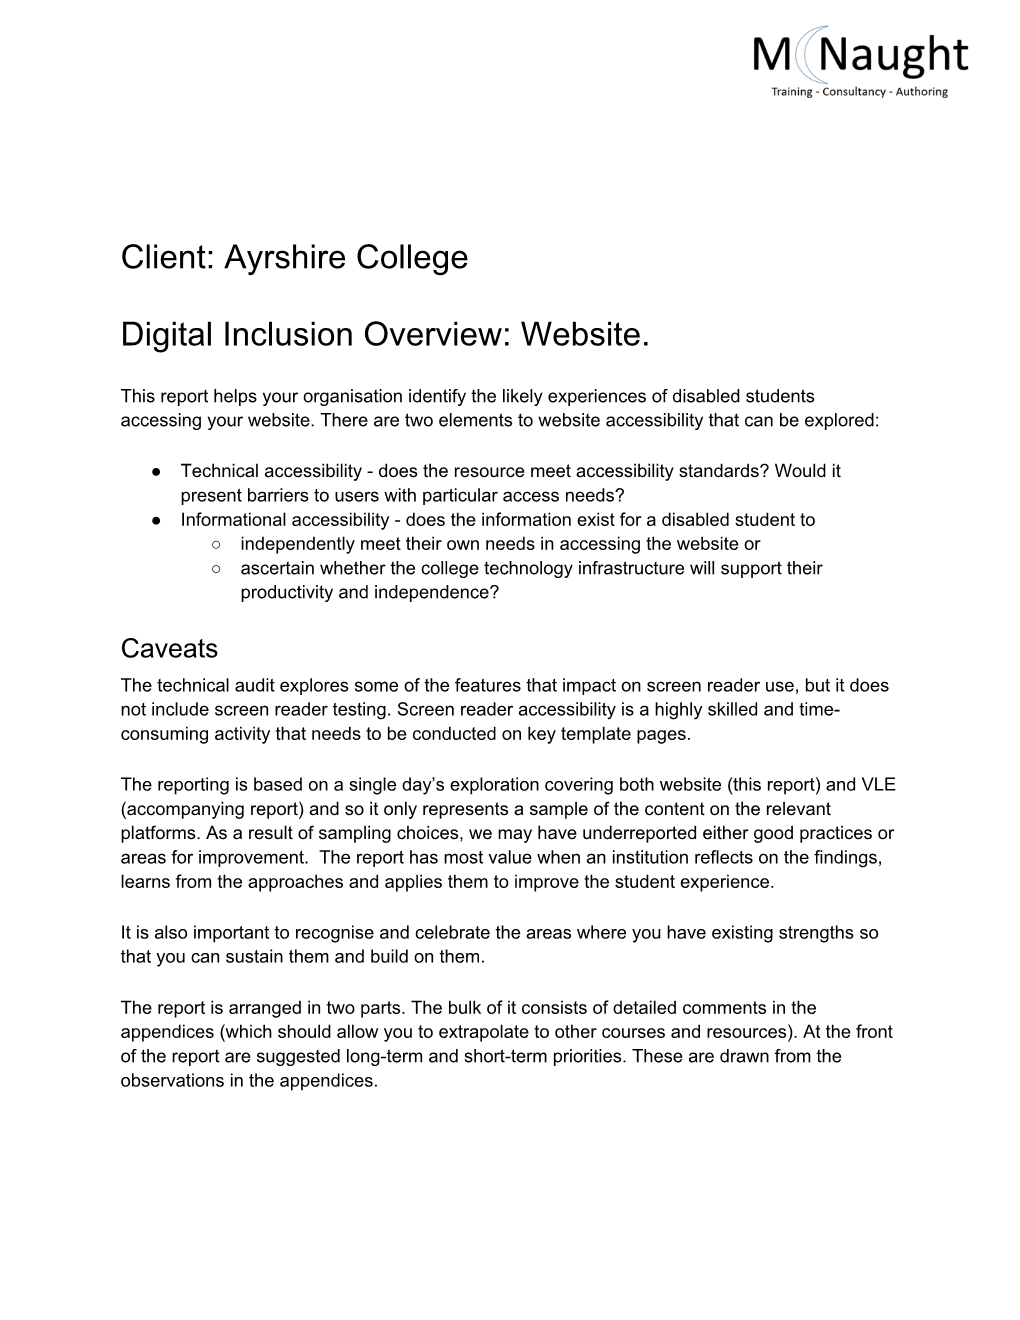 Client: Ayrshire College Digital Inclusion Overview: Website